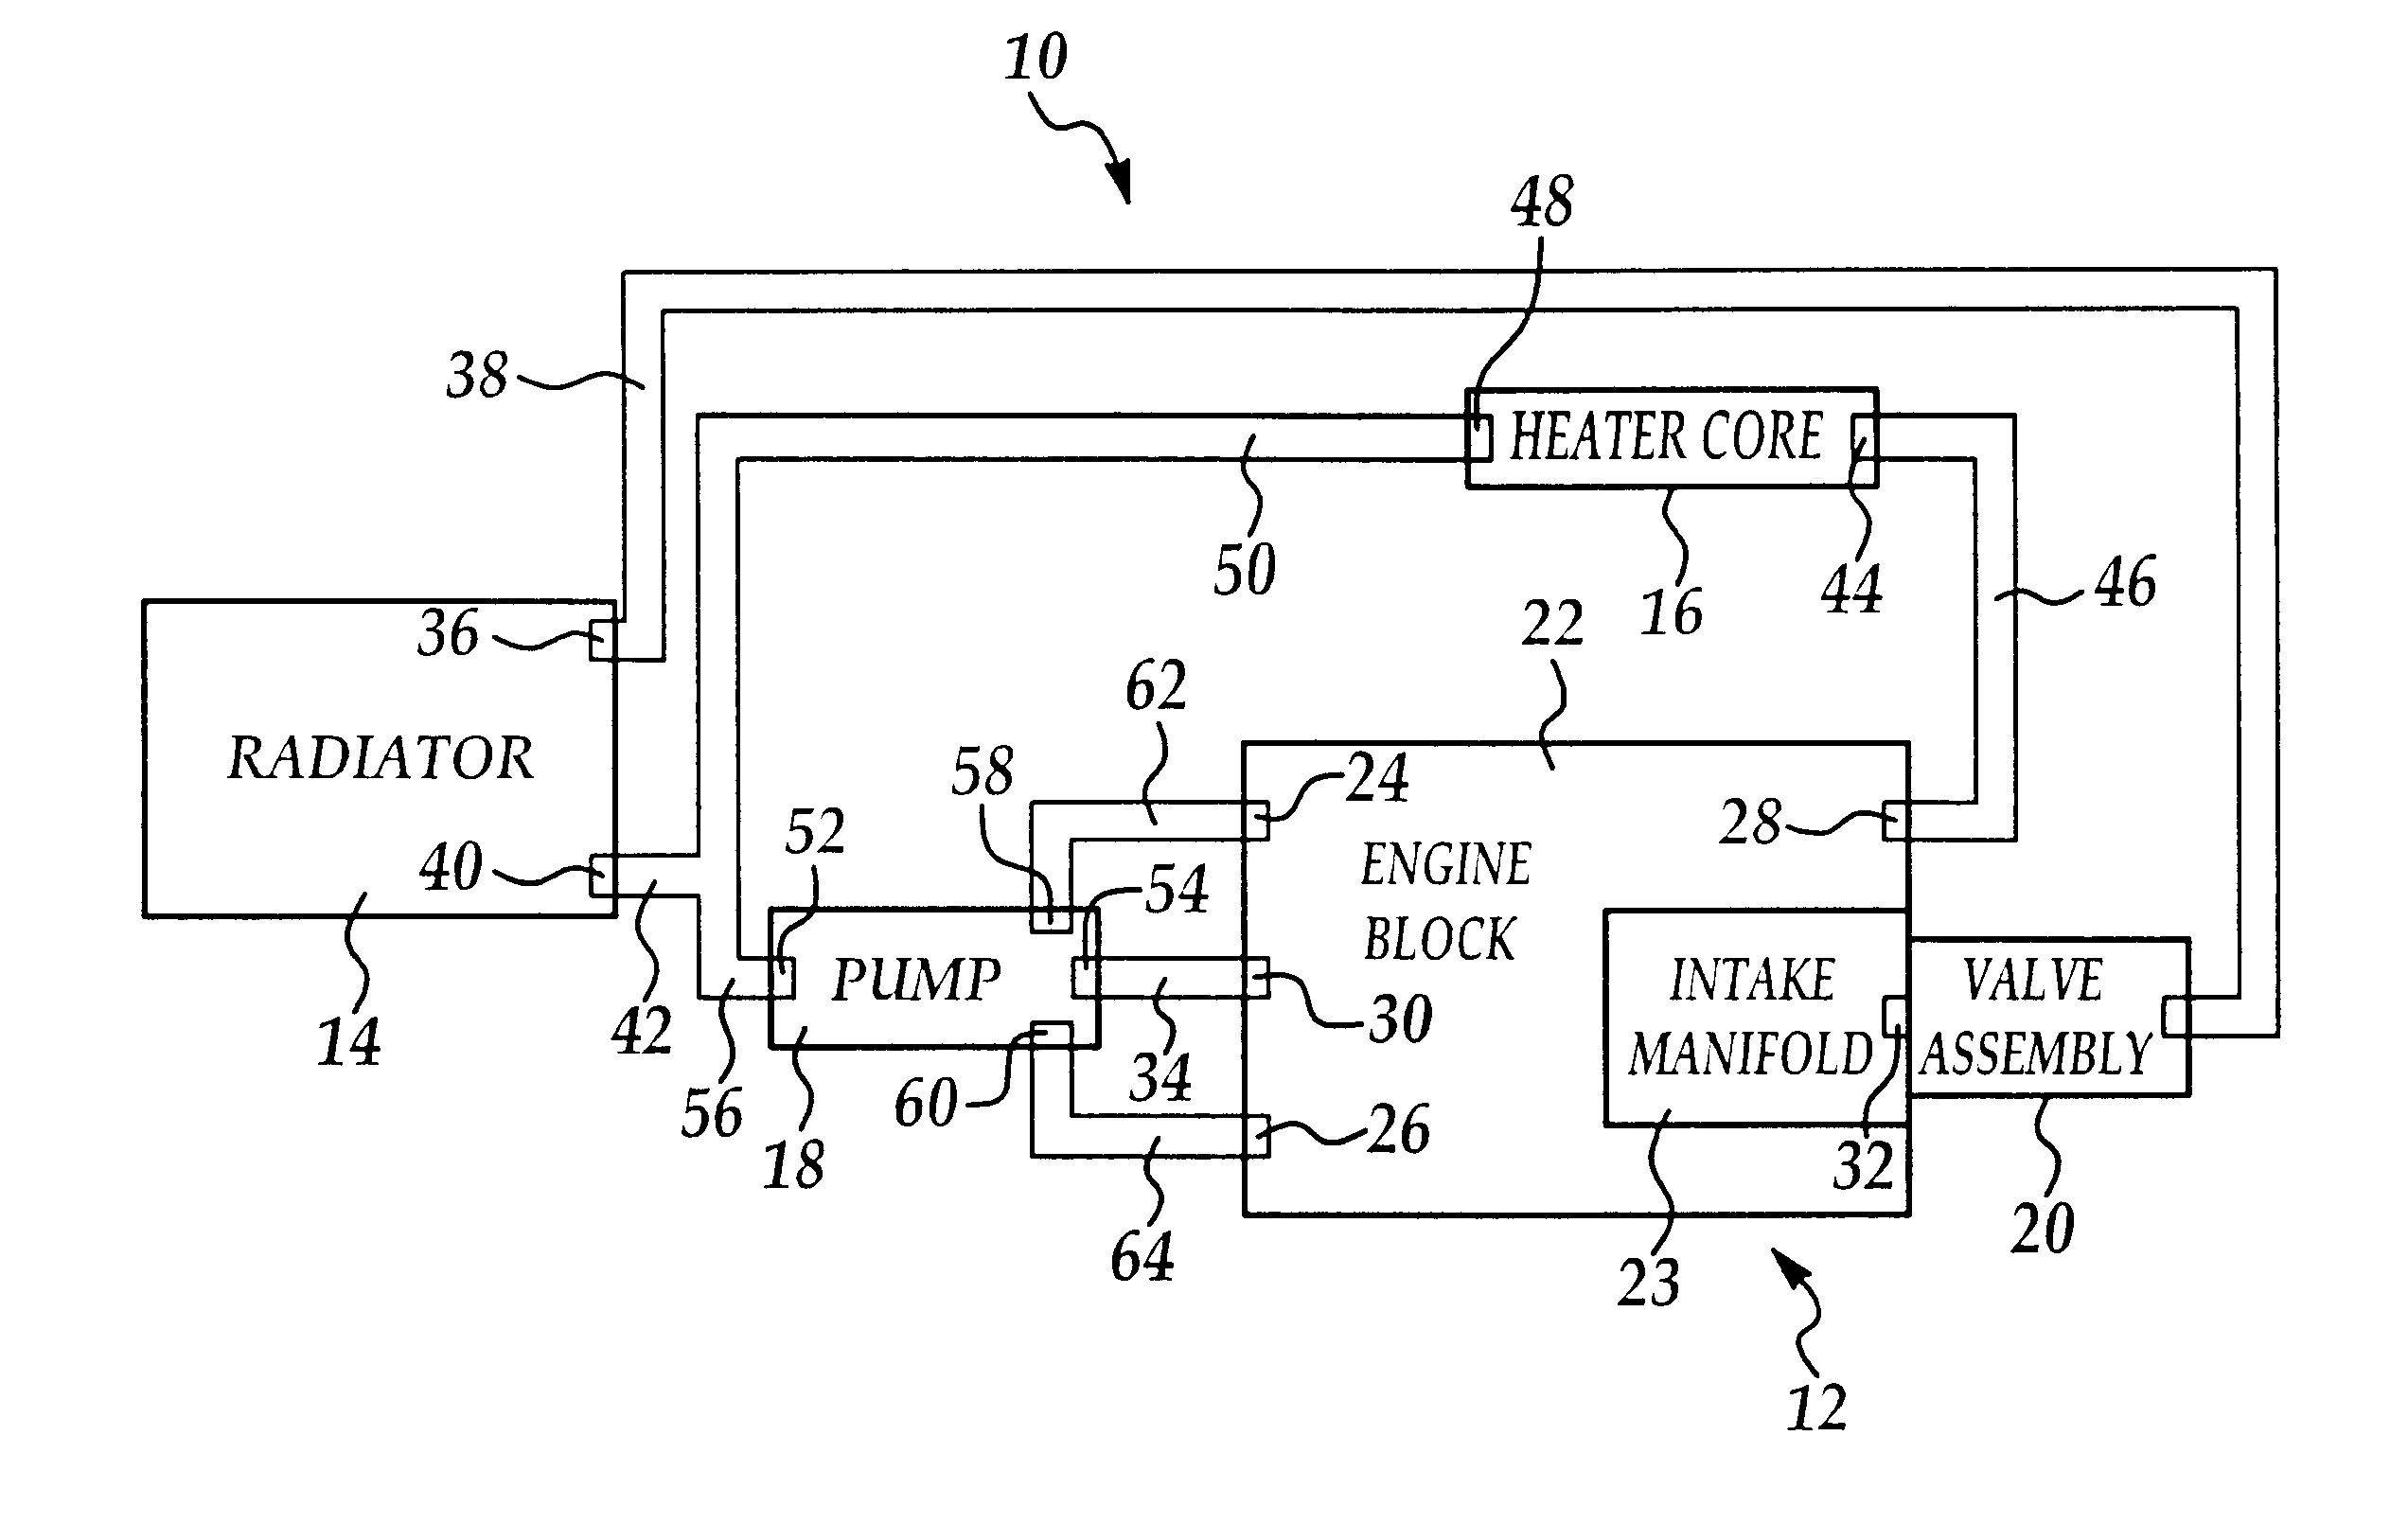 Valve assembly for controlling coolant flow exiting an engine